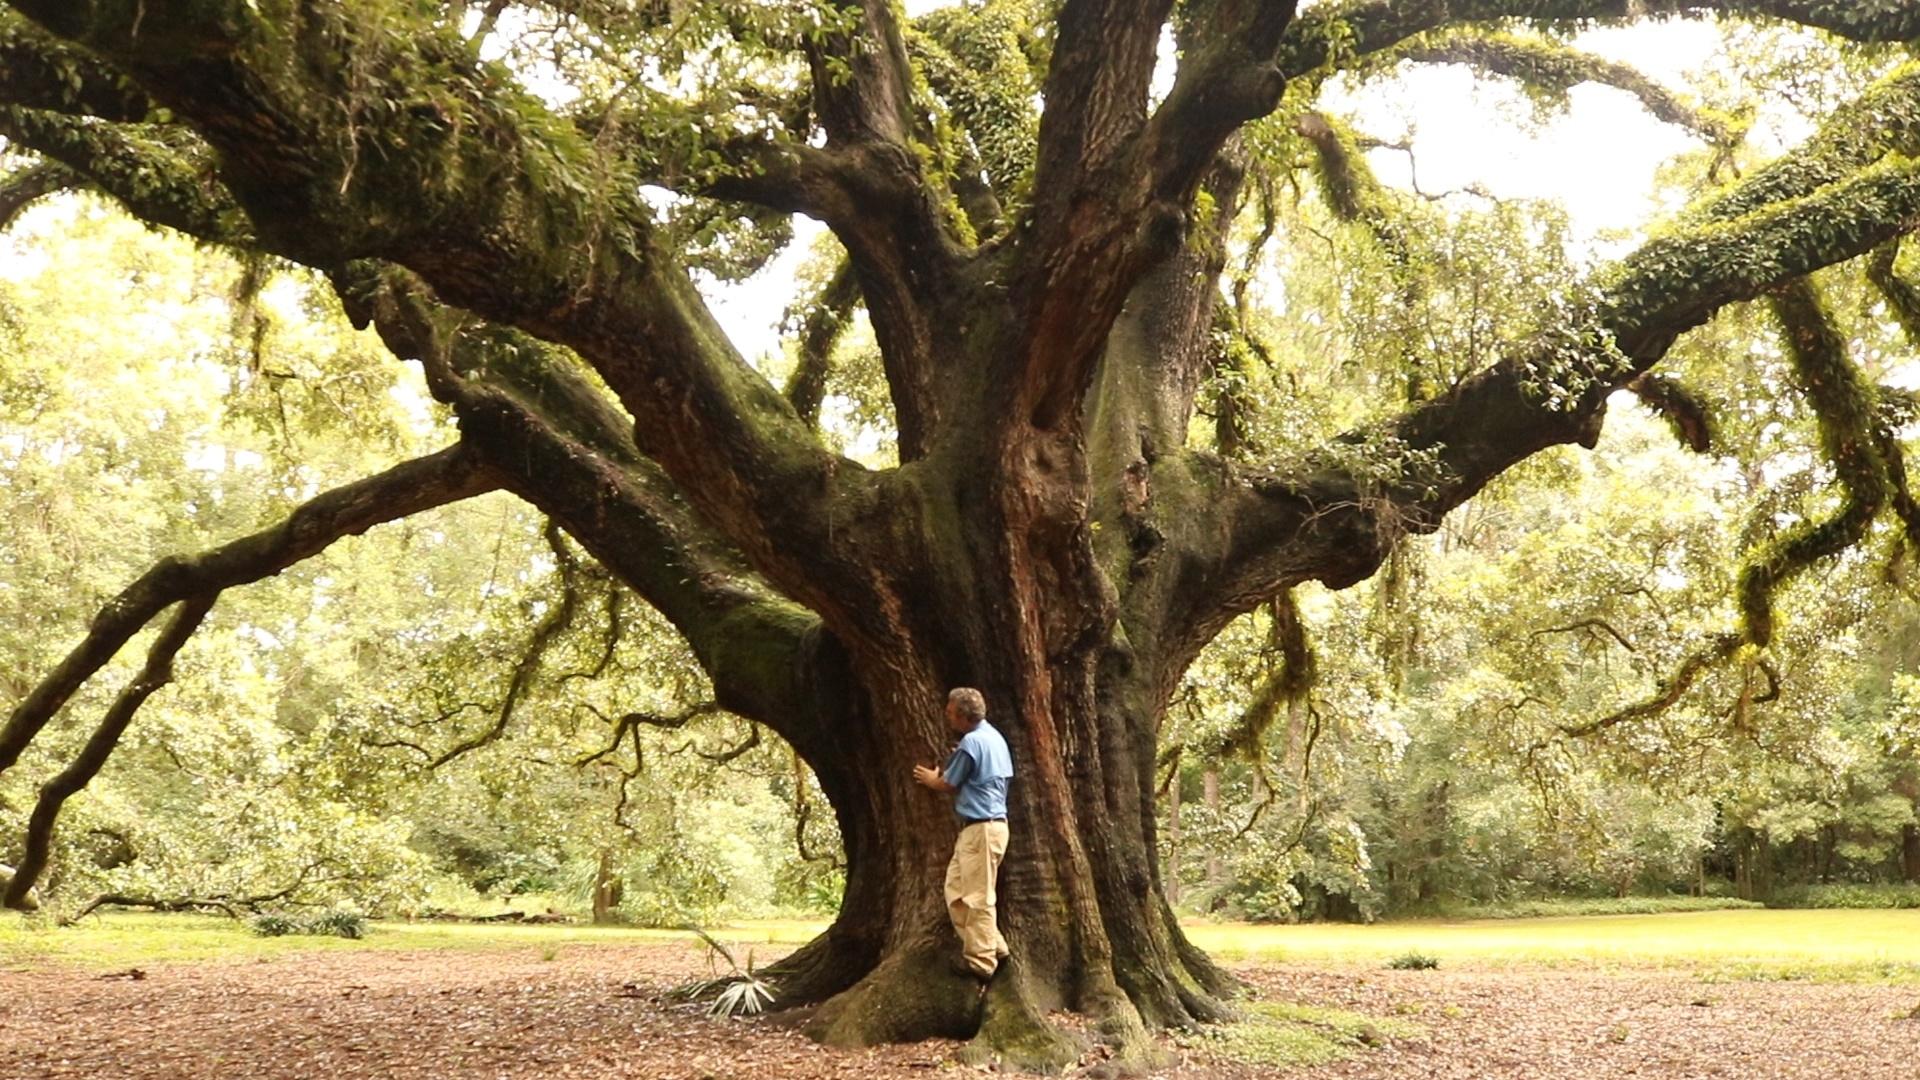 Live Oaks in Tallahassee Part 1 | History, Age, and Exceptional Trees